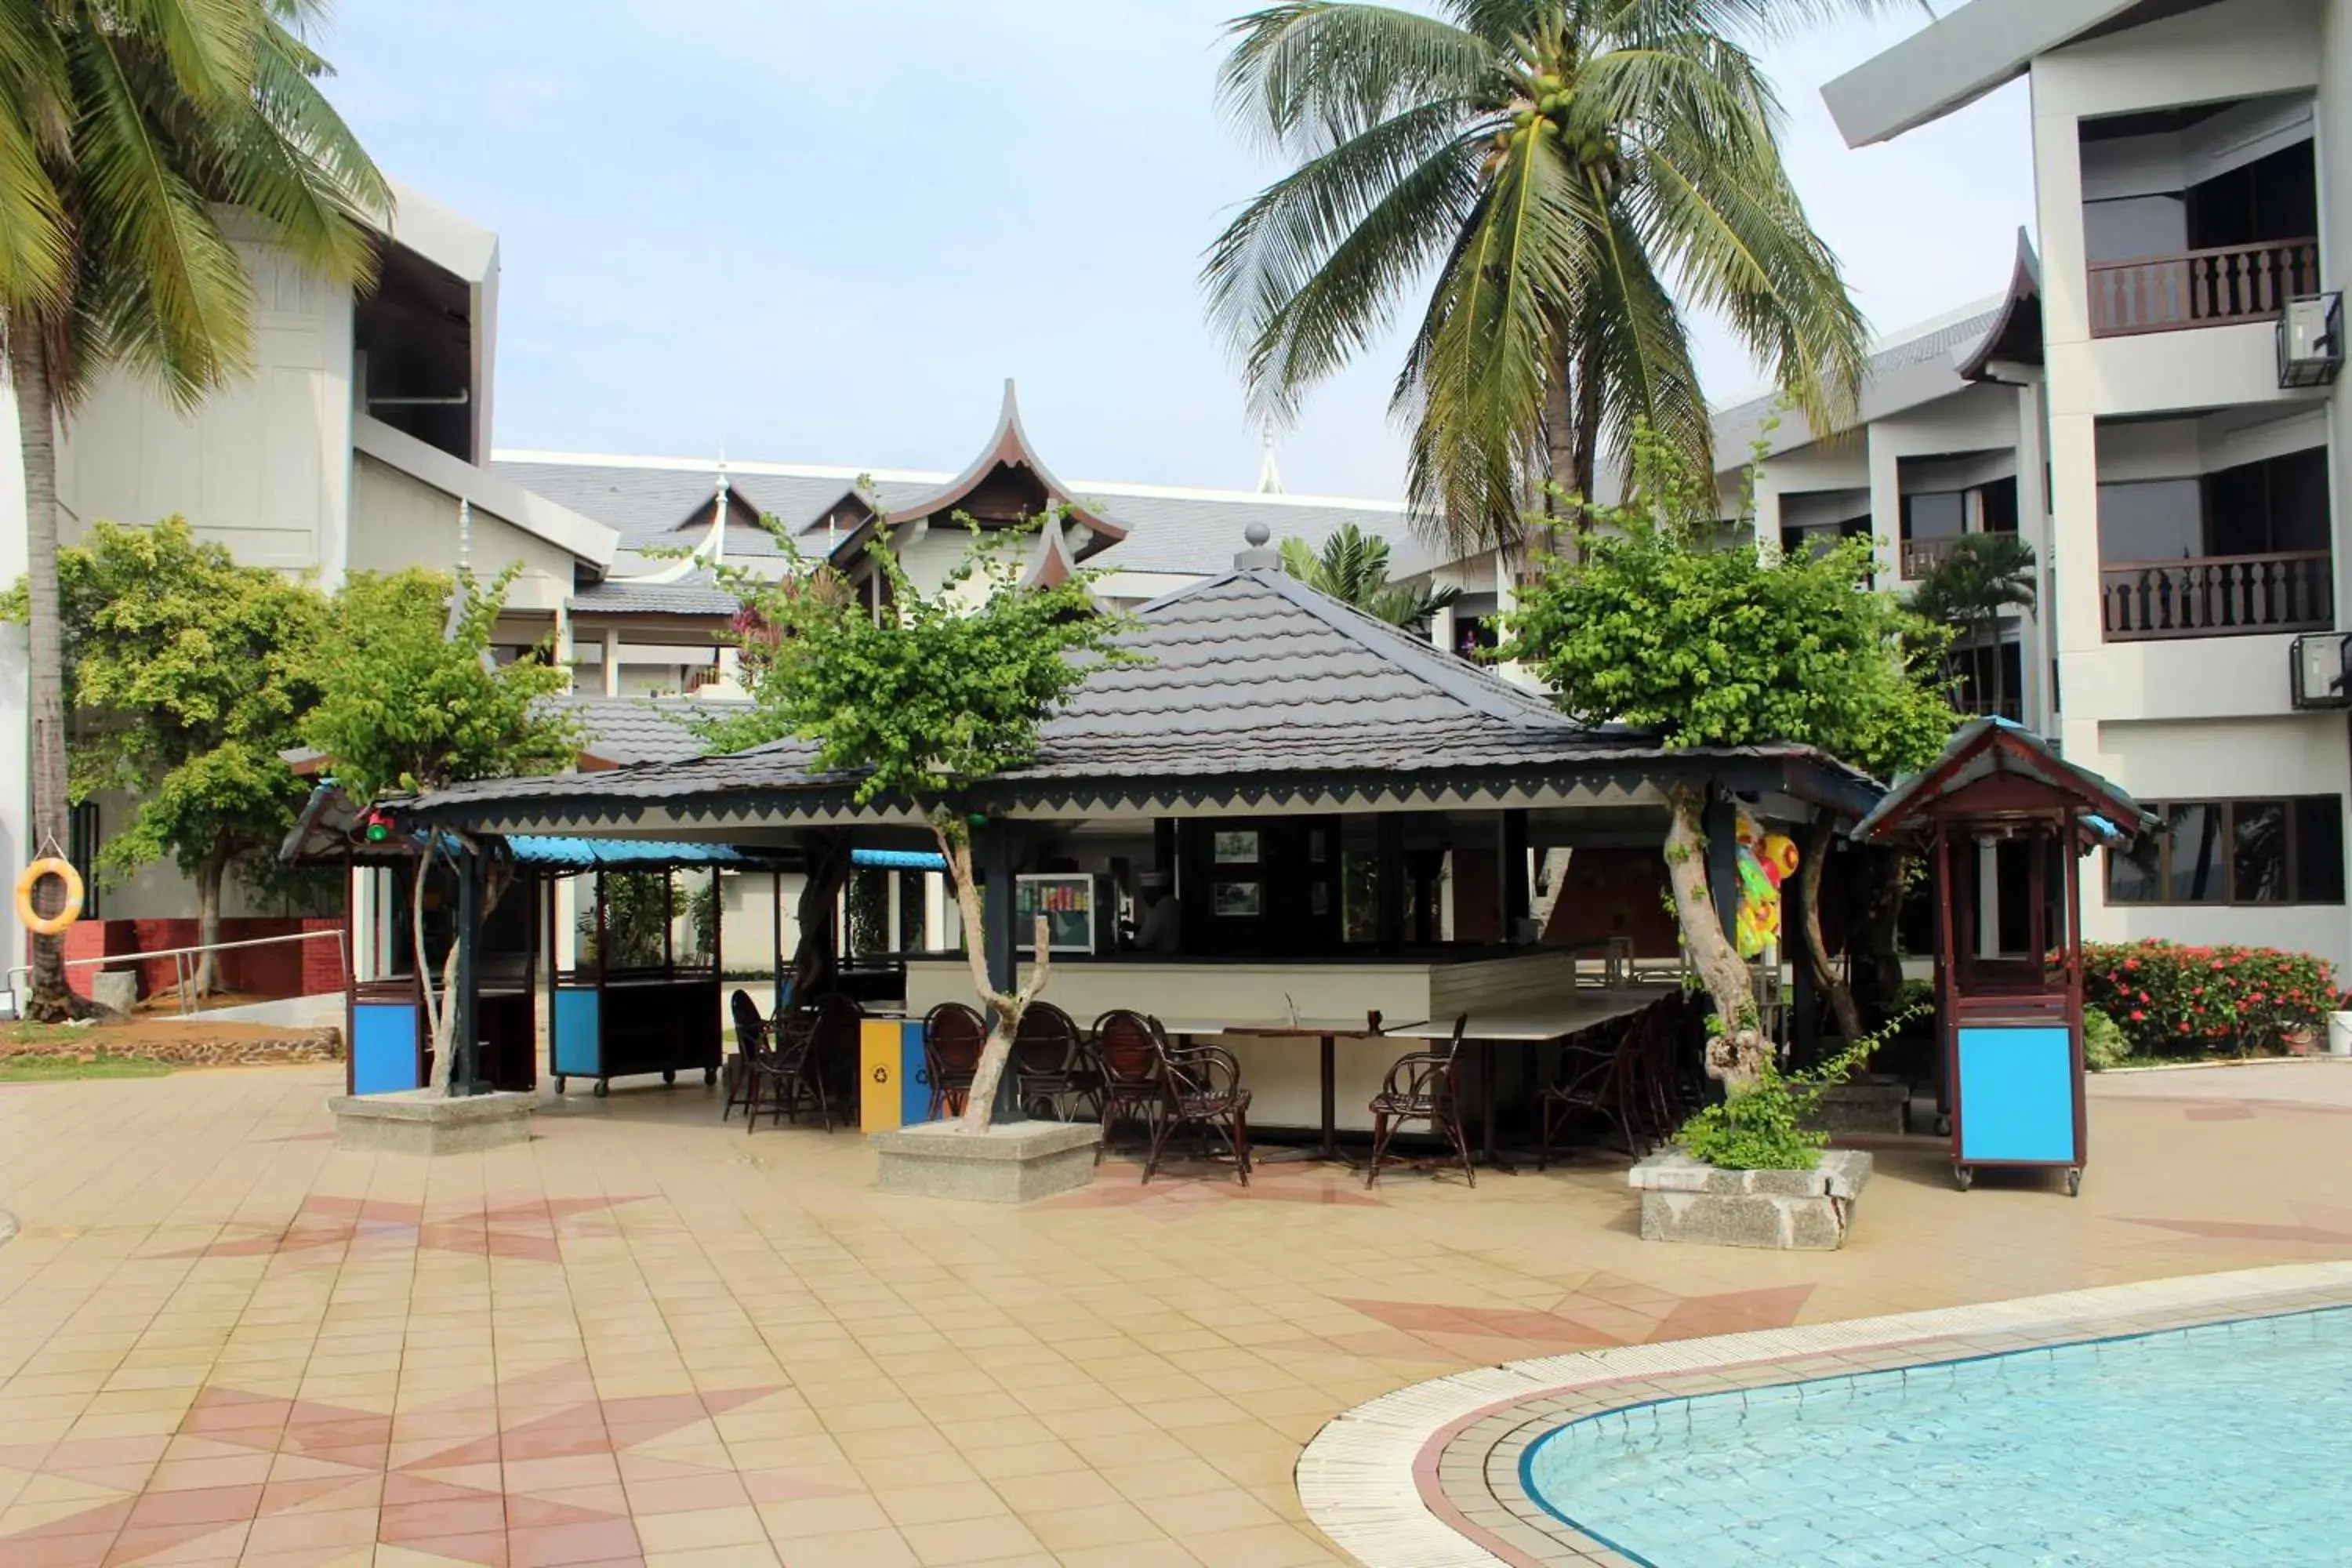 Area and facilities, Property Building in The Grand Beach Resort